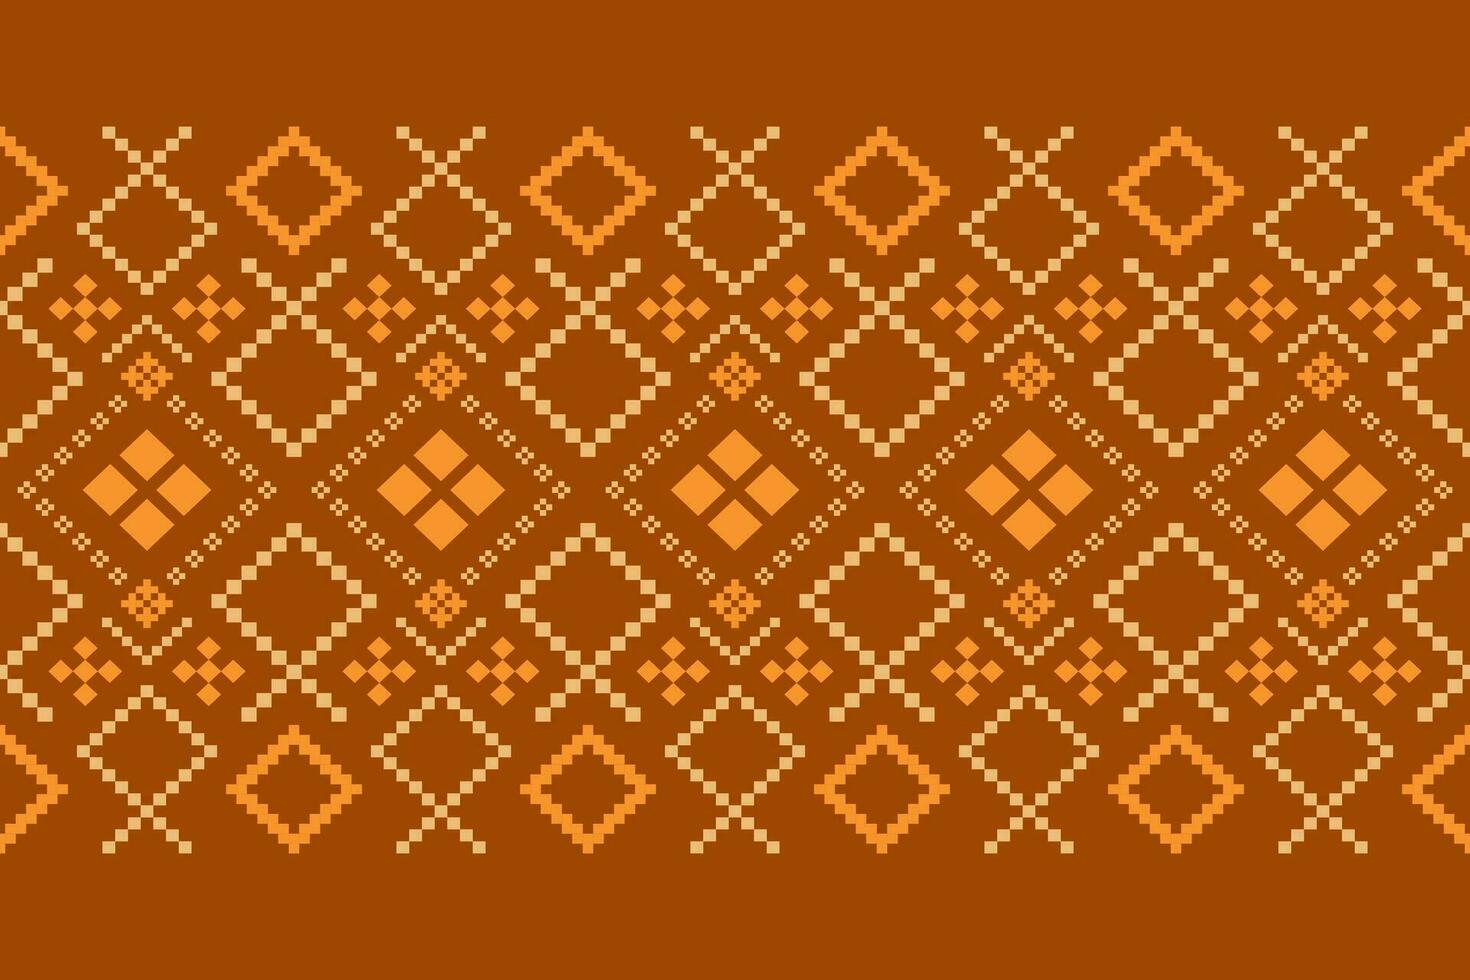 Orange vintages cross stitch traditional ethnic pattern paisley flower Ikat background abstract Aztec African Indonesian Indian seamless pattern for fabric print cloth dress carpet curtains and sarong vector